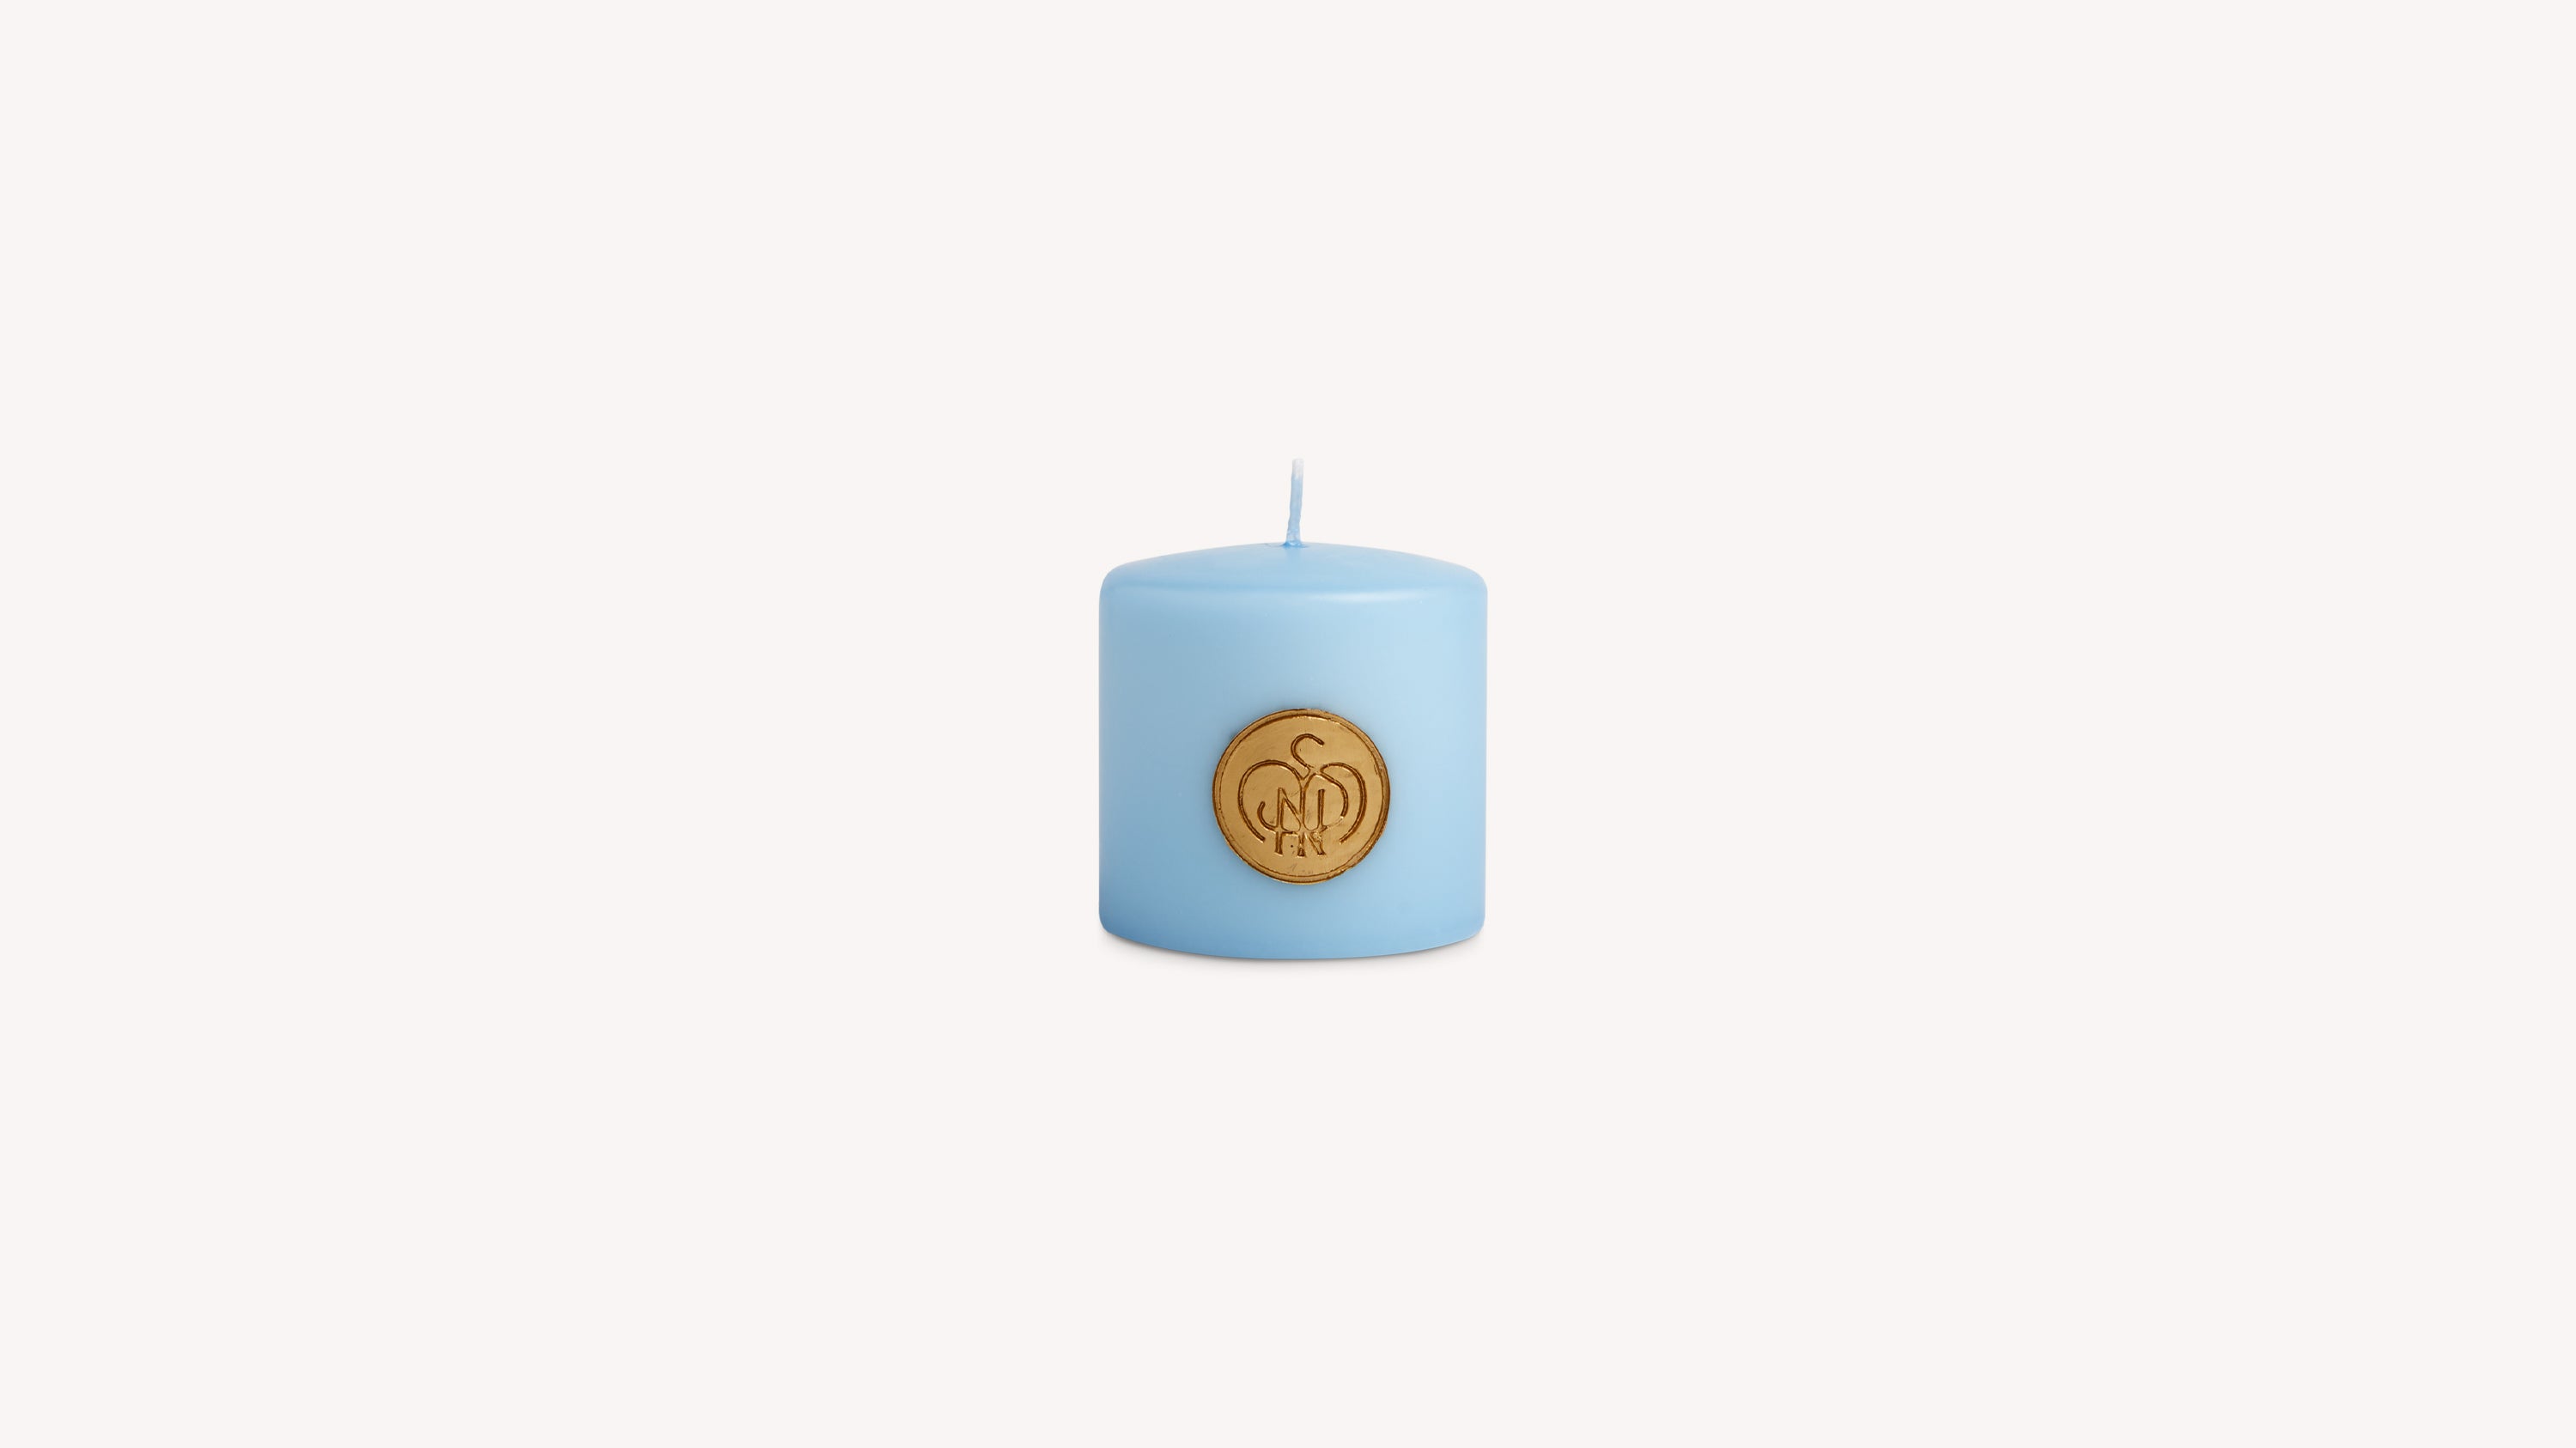 Angeli di Firenze Scented Candle